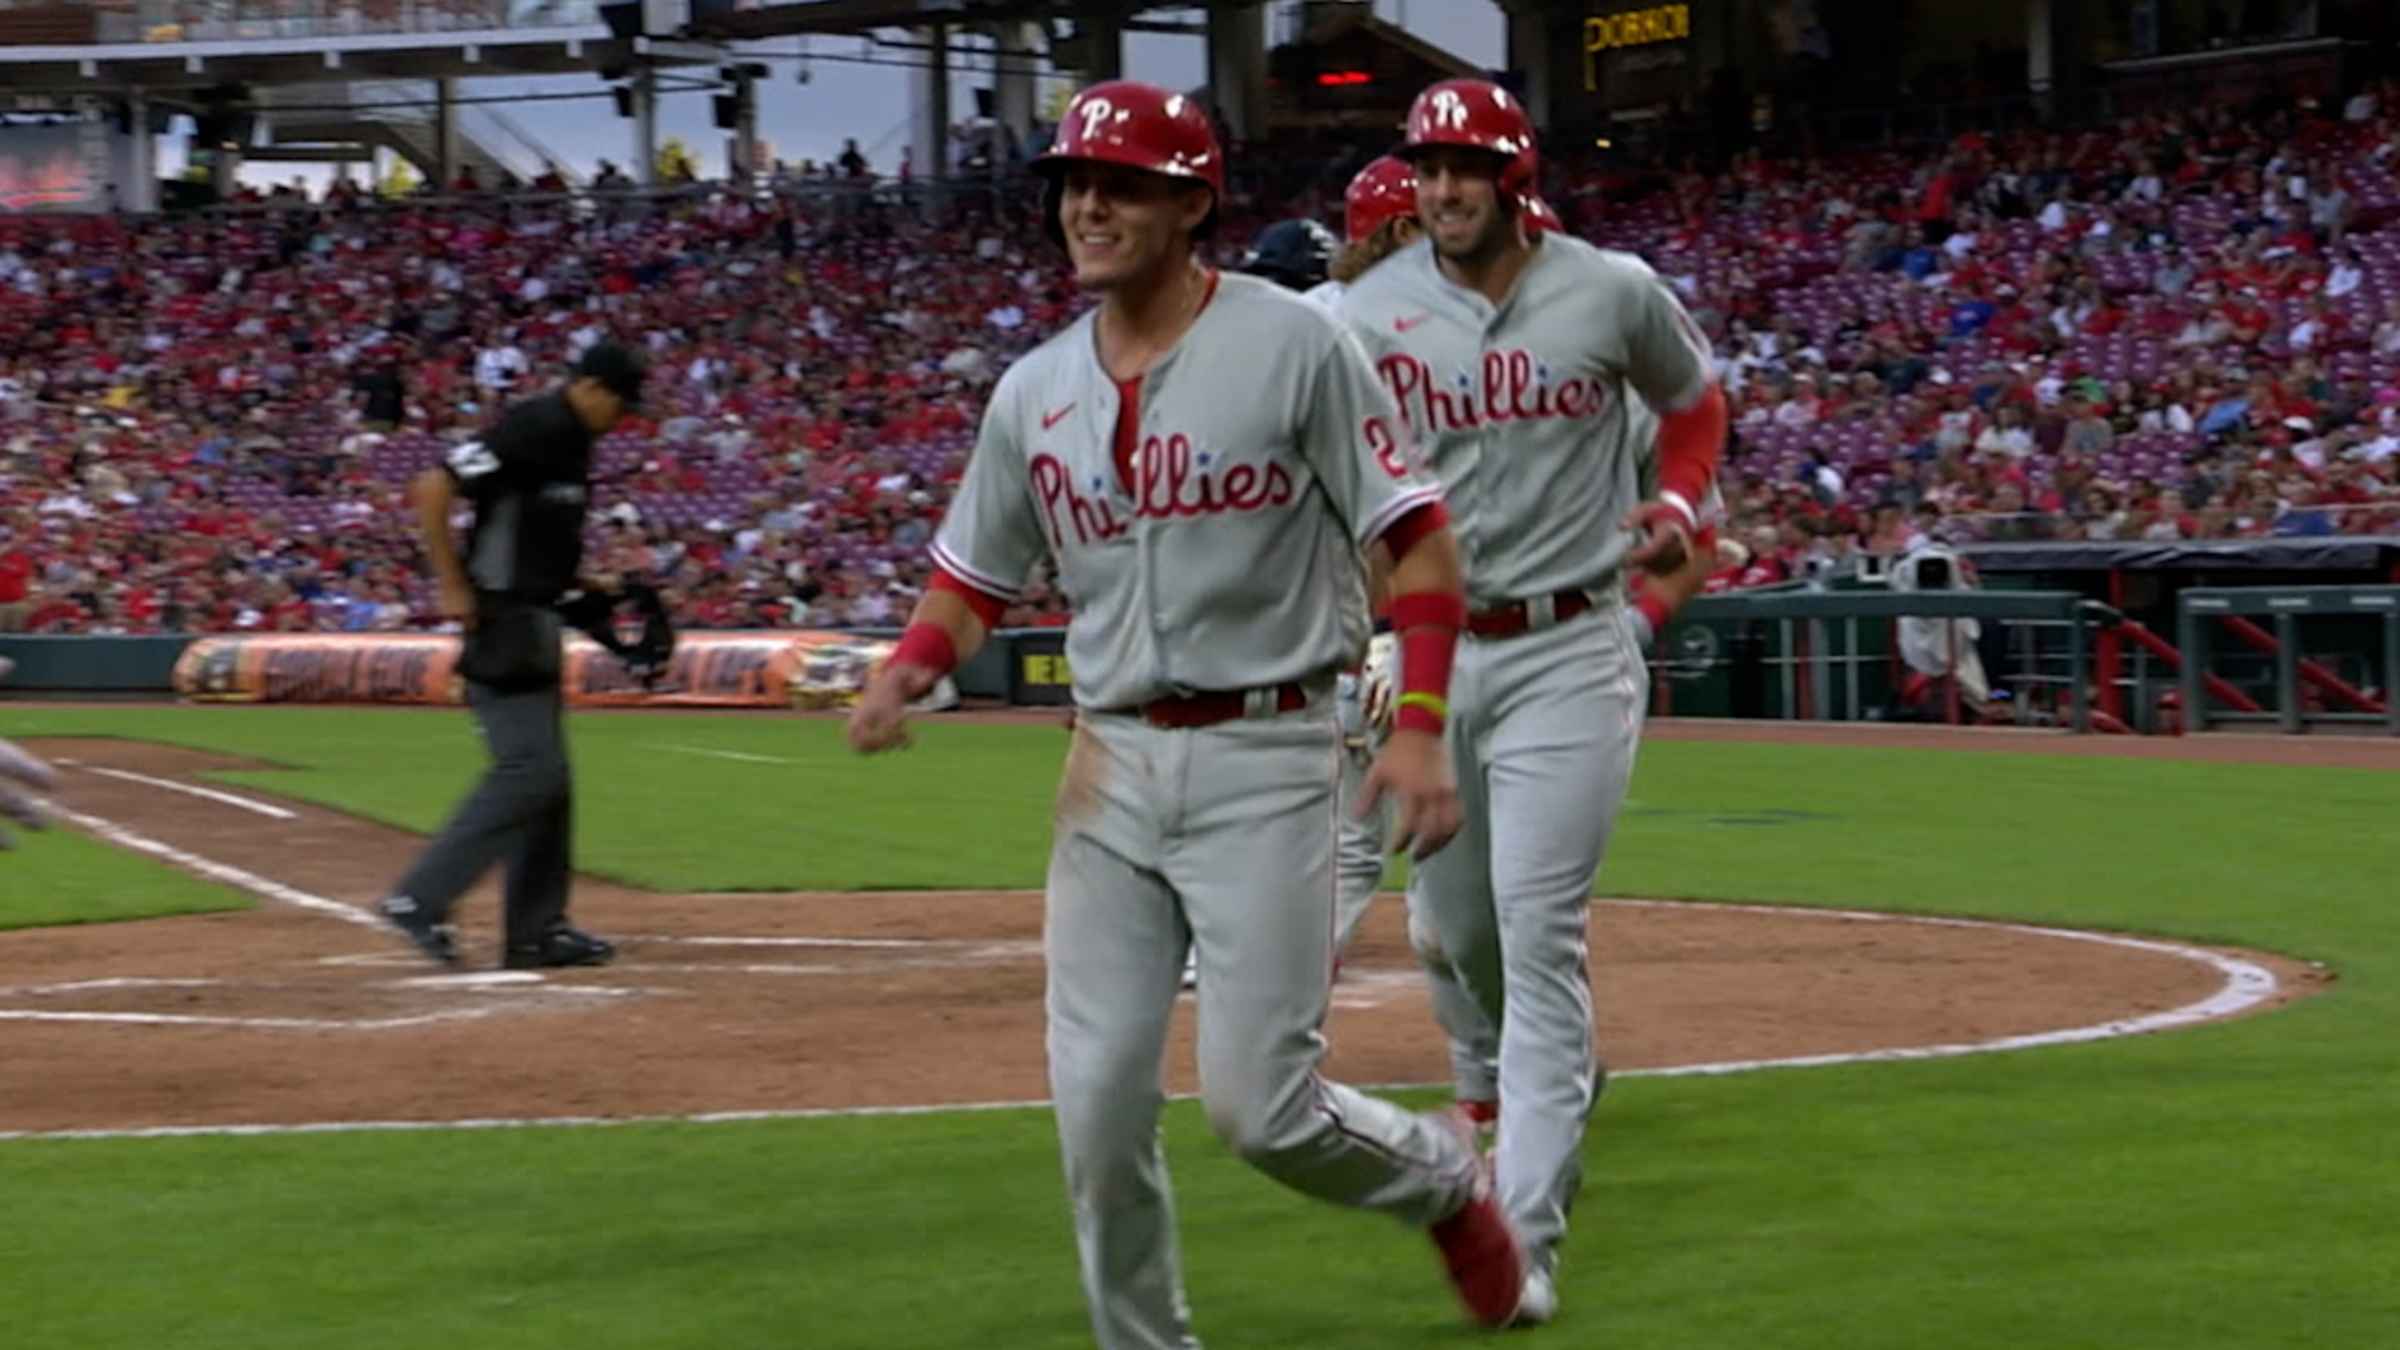 Rhys Hoskins' game-tying home run was reversed to a ground-rule double